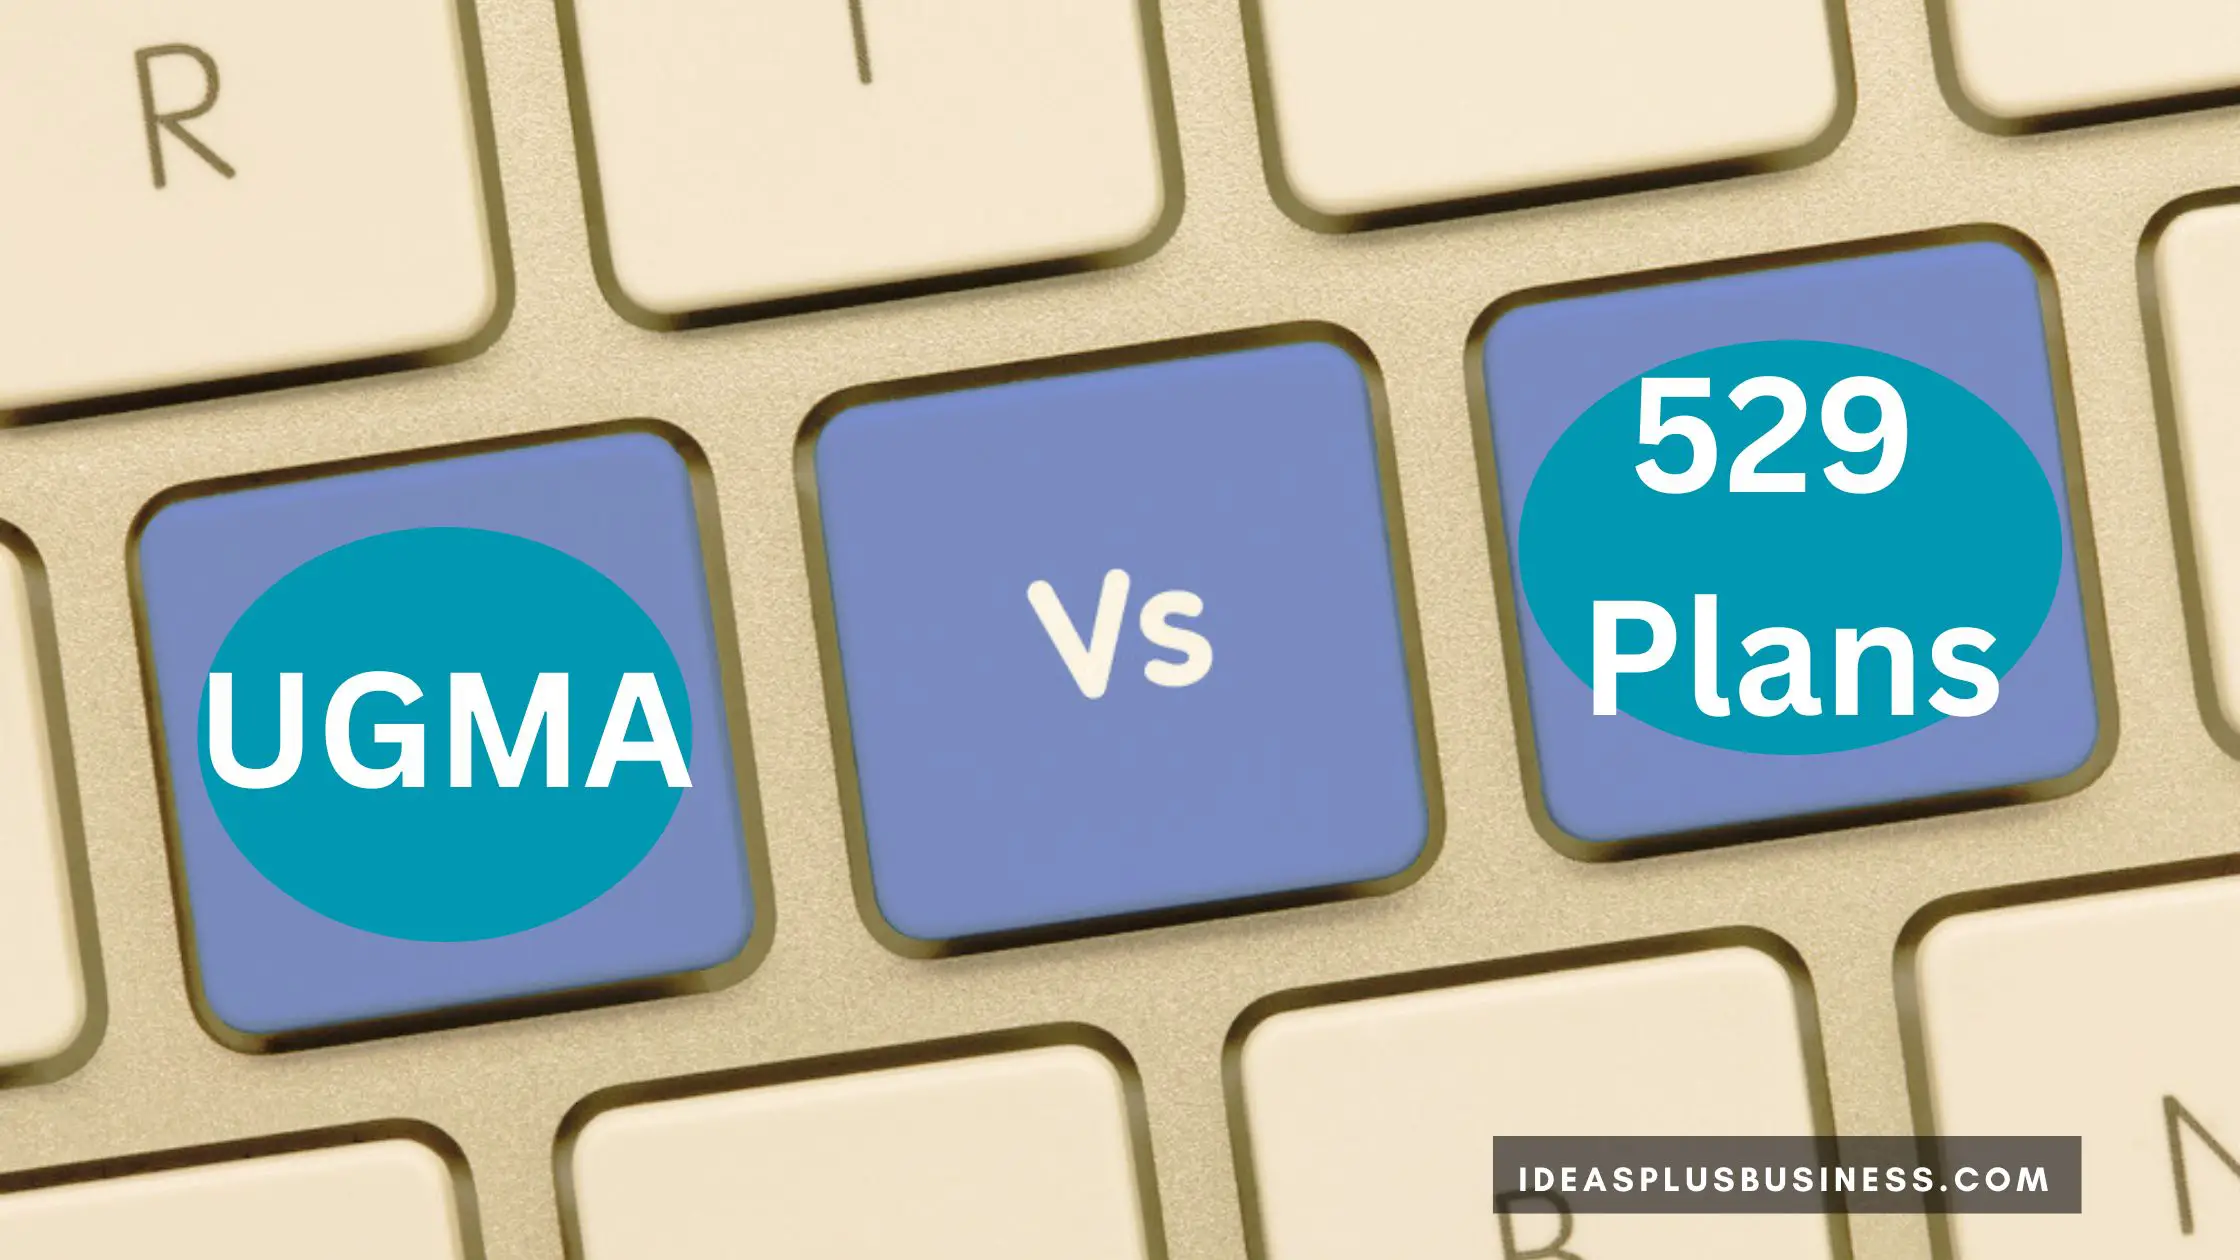 UGMA vs 529 Plans: Which is better